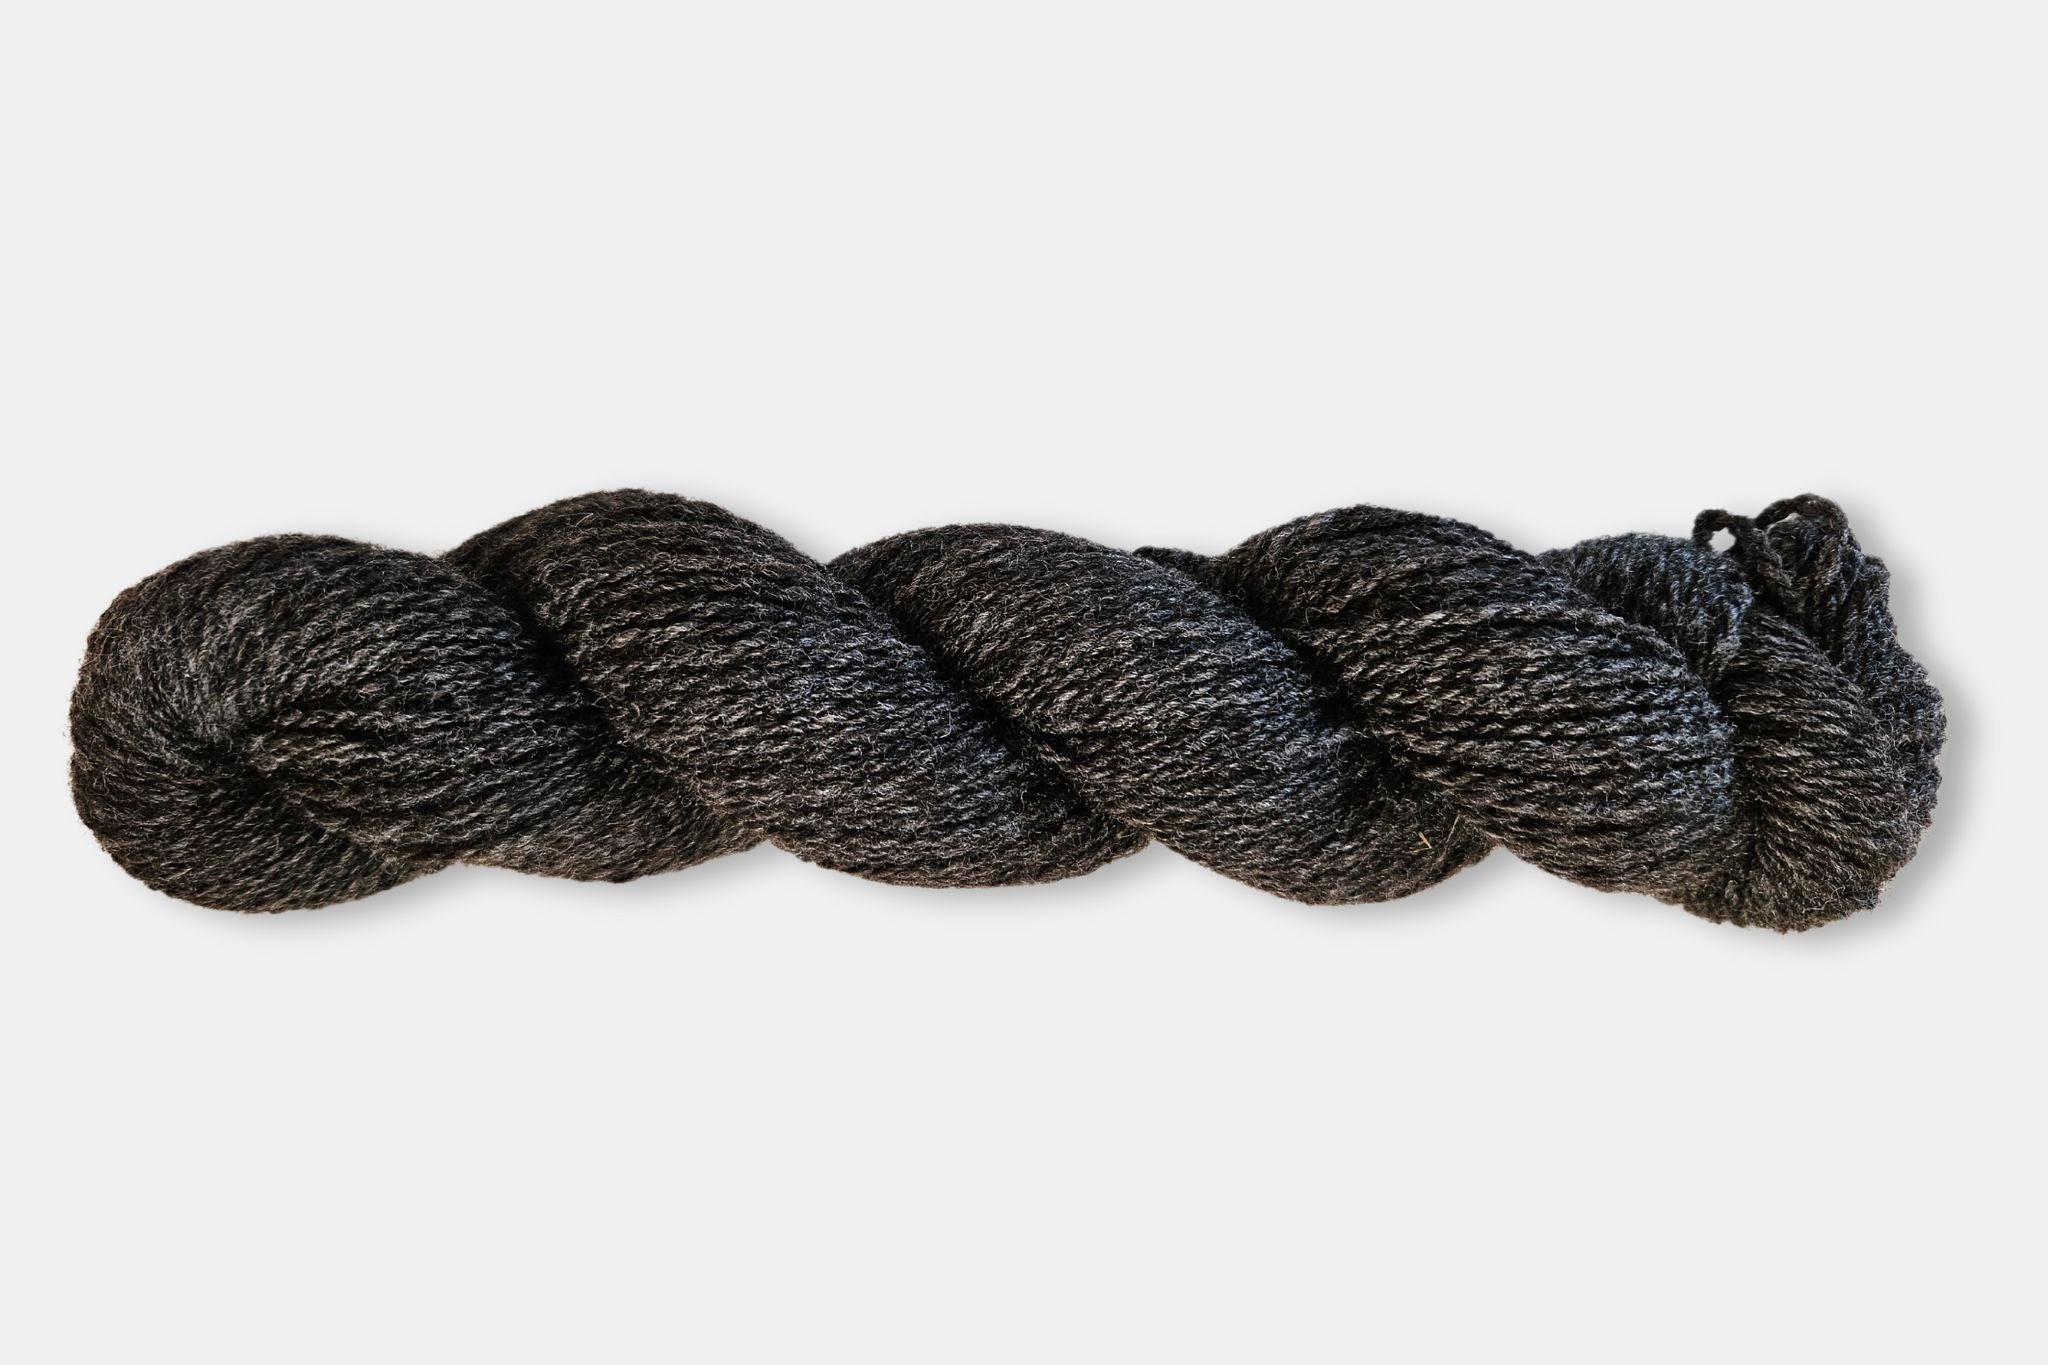 Fleece and Harmony Selkirk Worsted in Natural Black